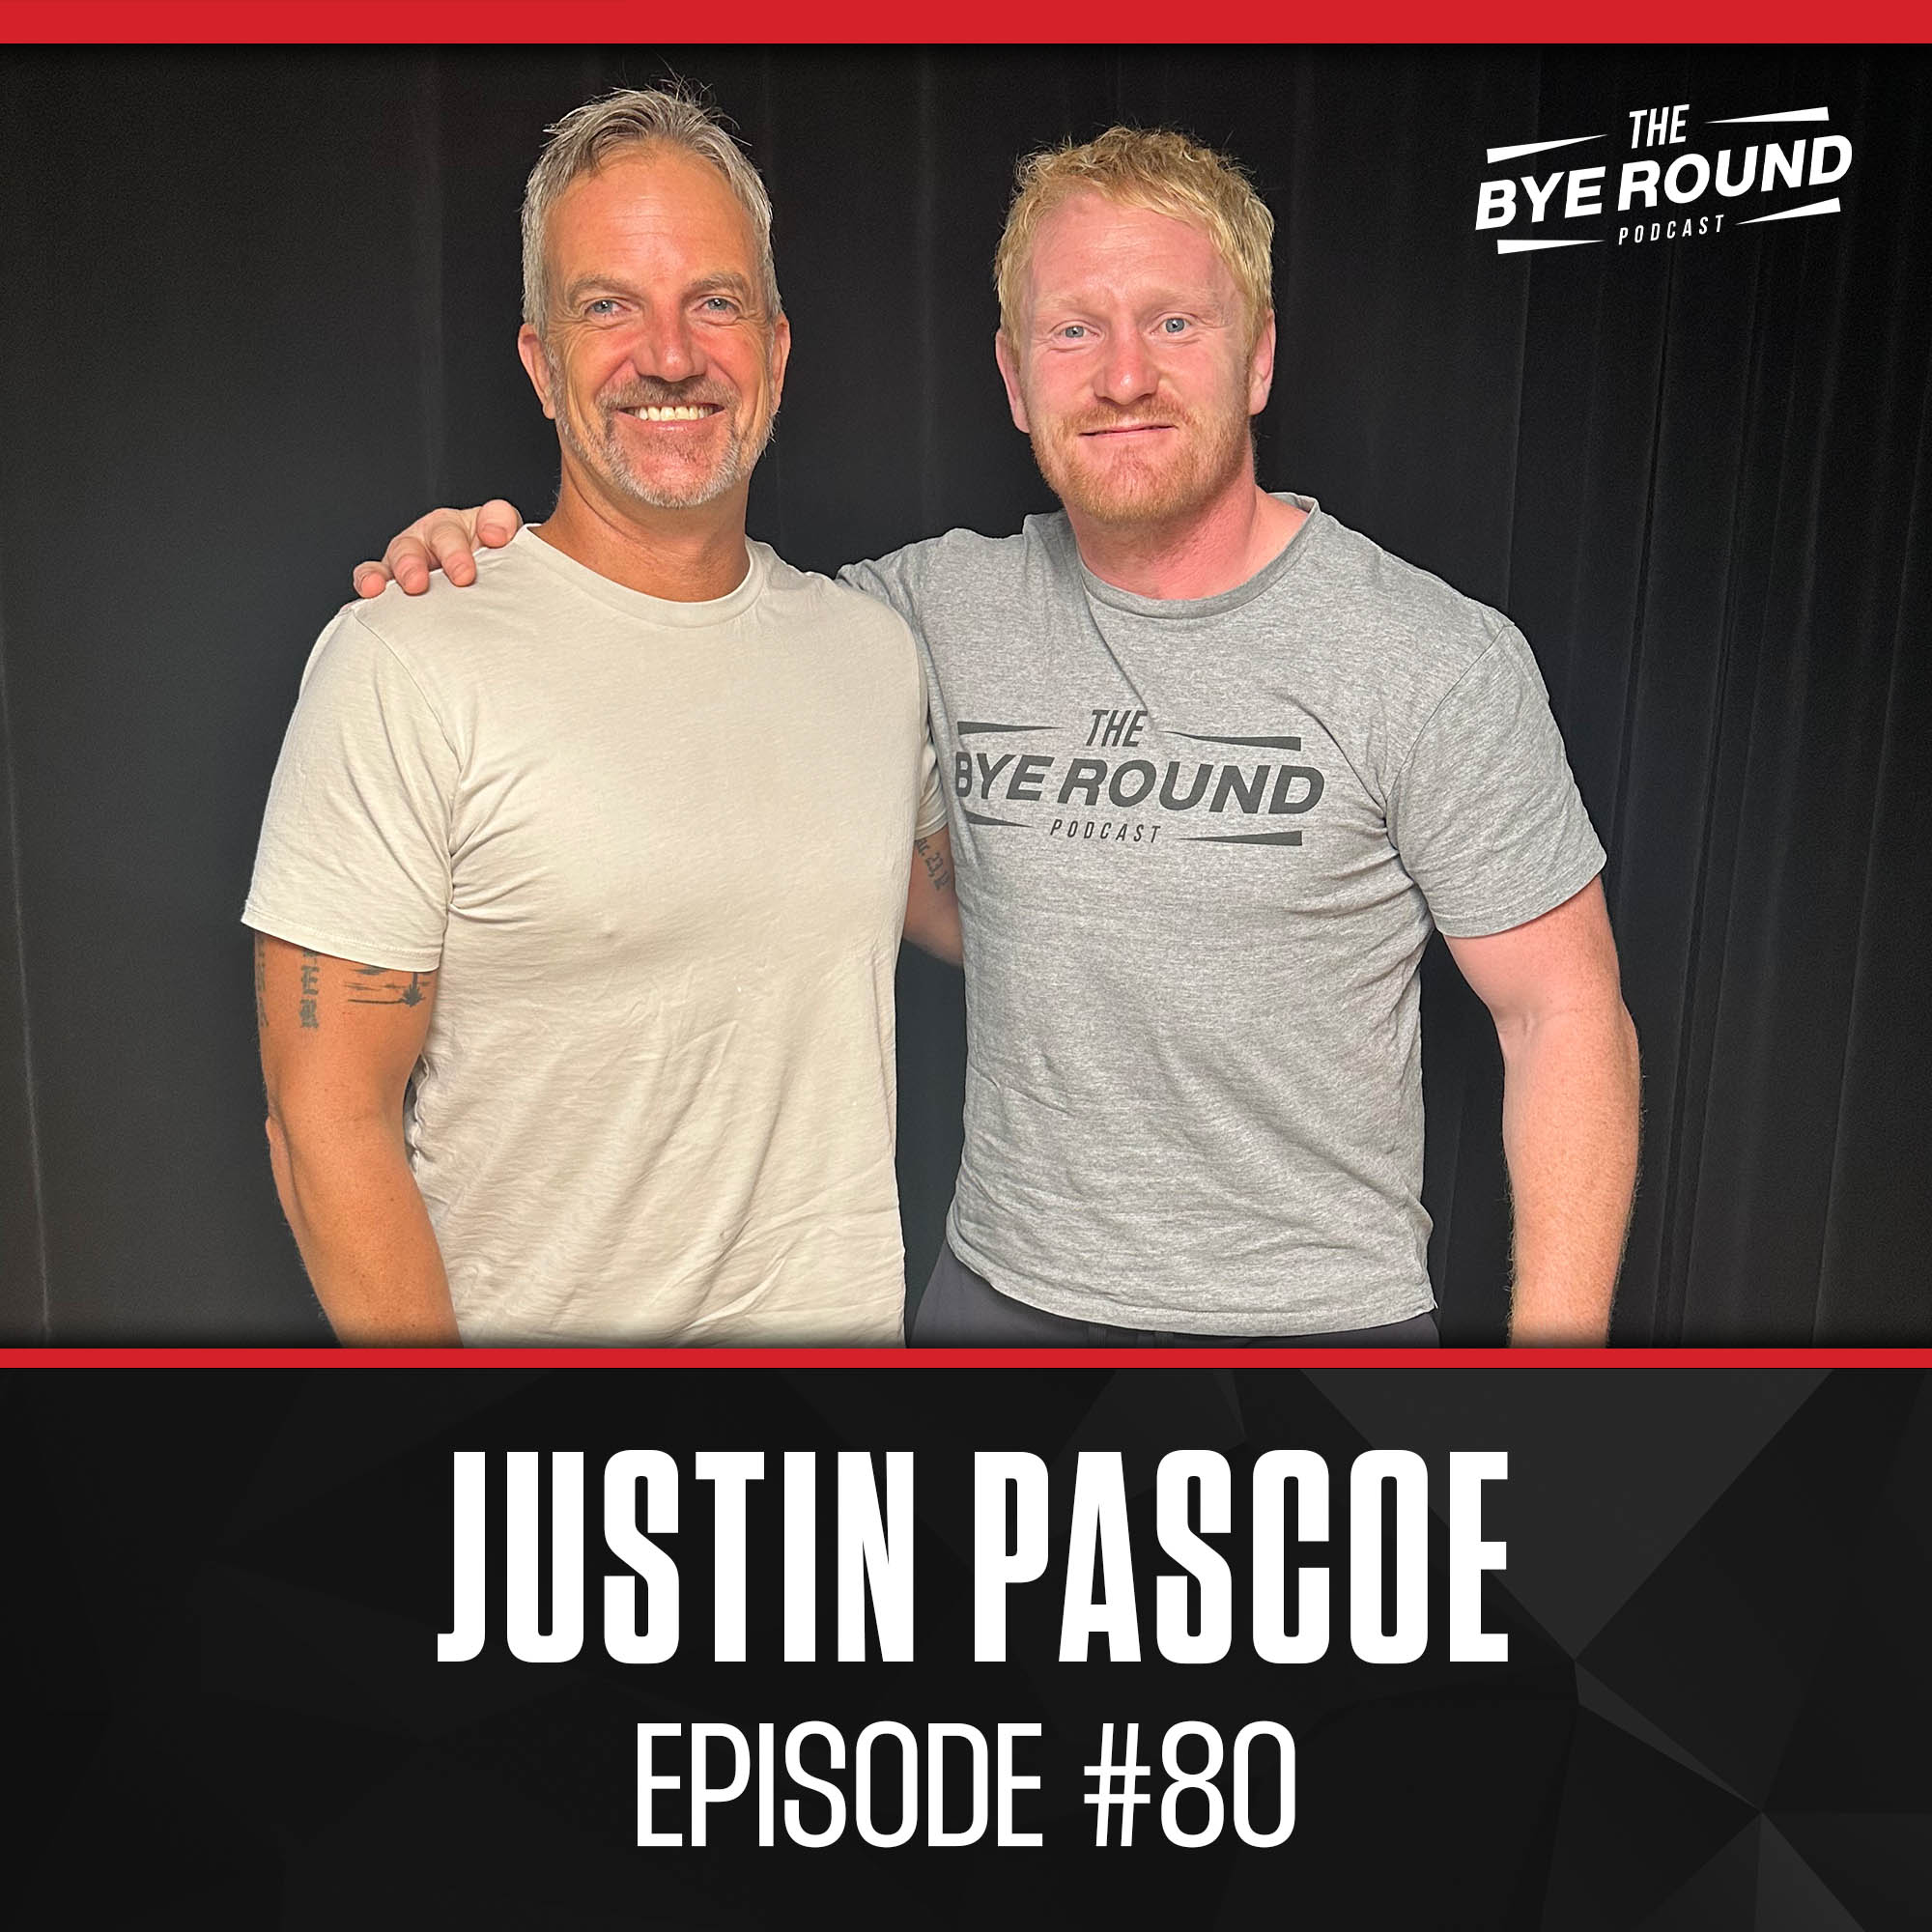 The CEO: Justin Pascoe